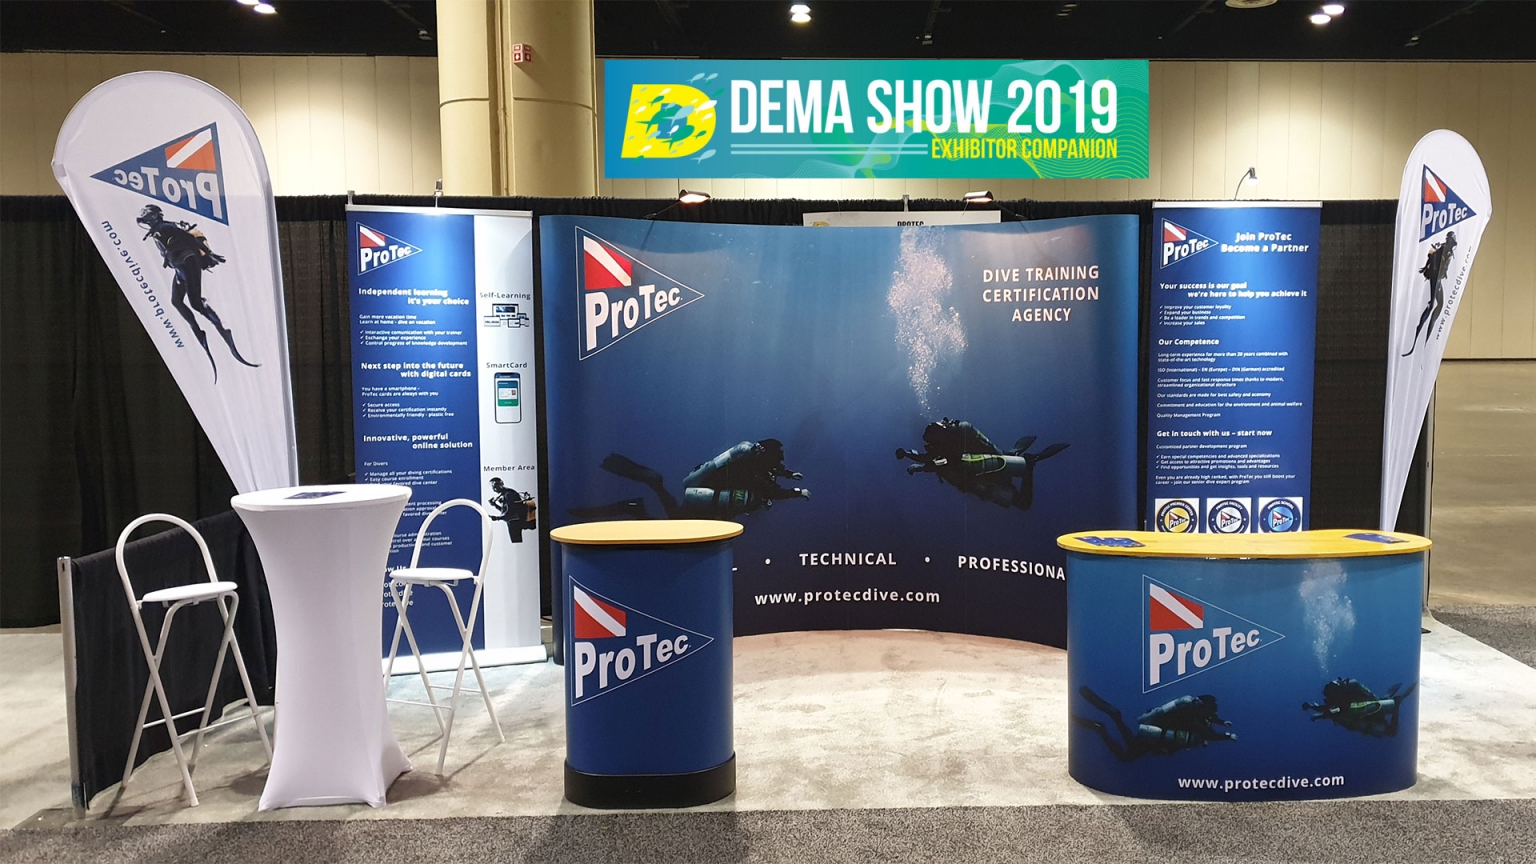 Protec At Dema Show 2019 In Orlando Protec International Professional Technical And Recreational